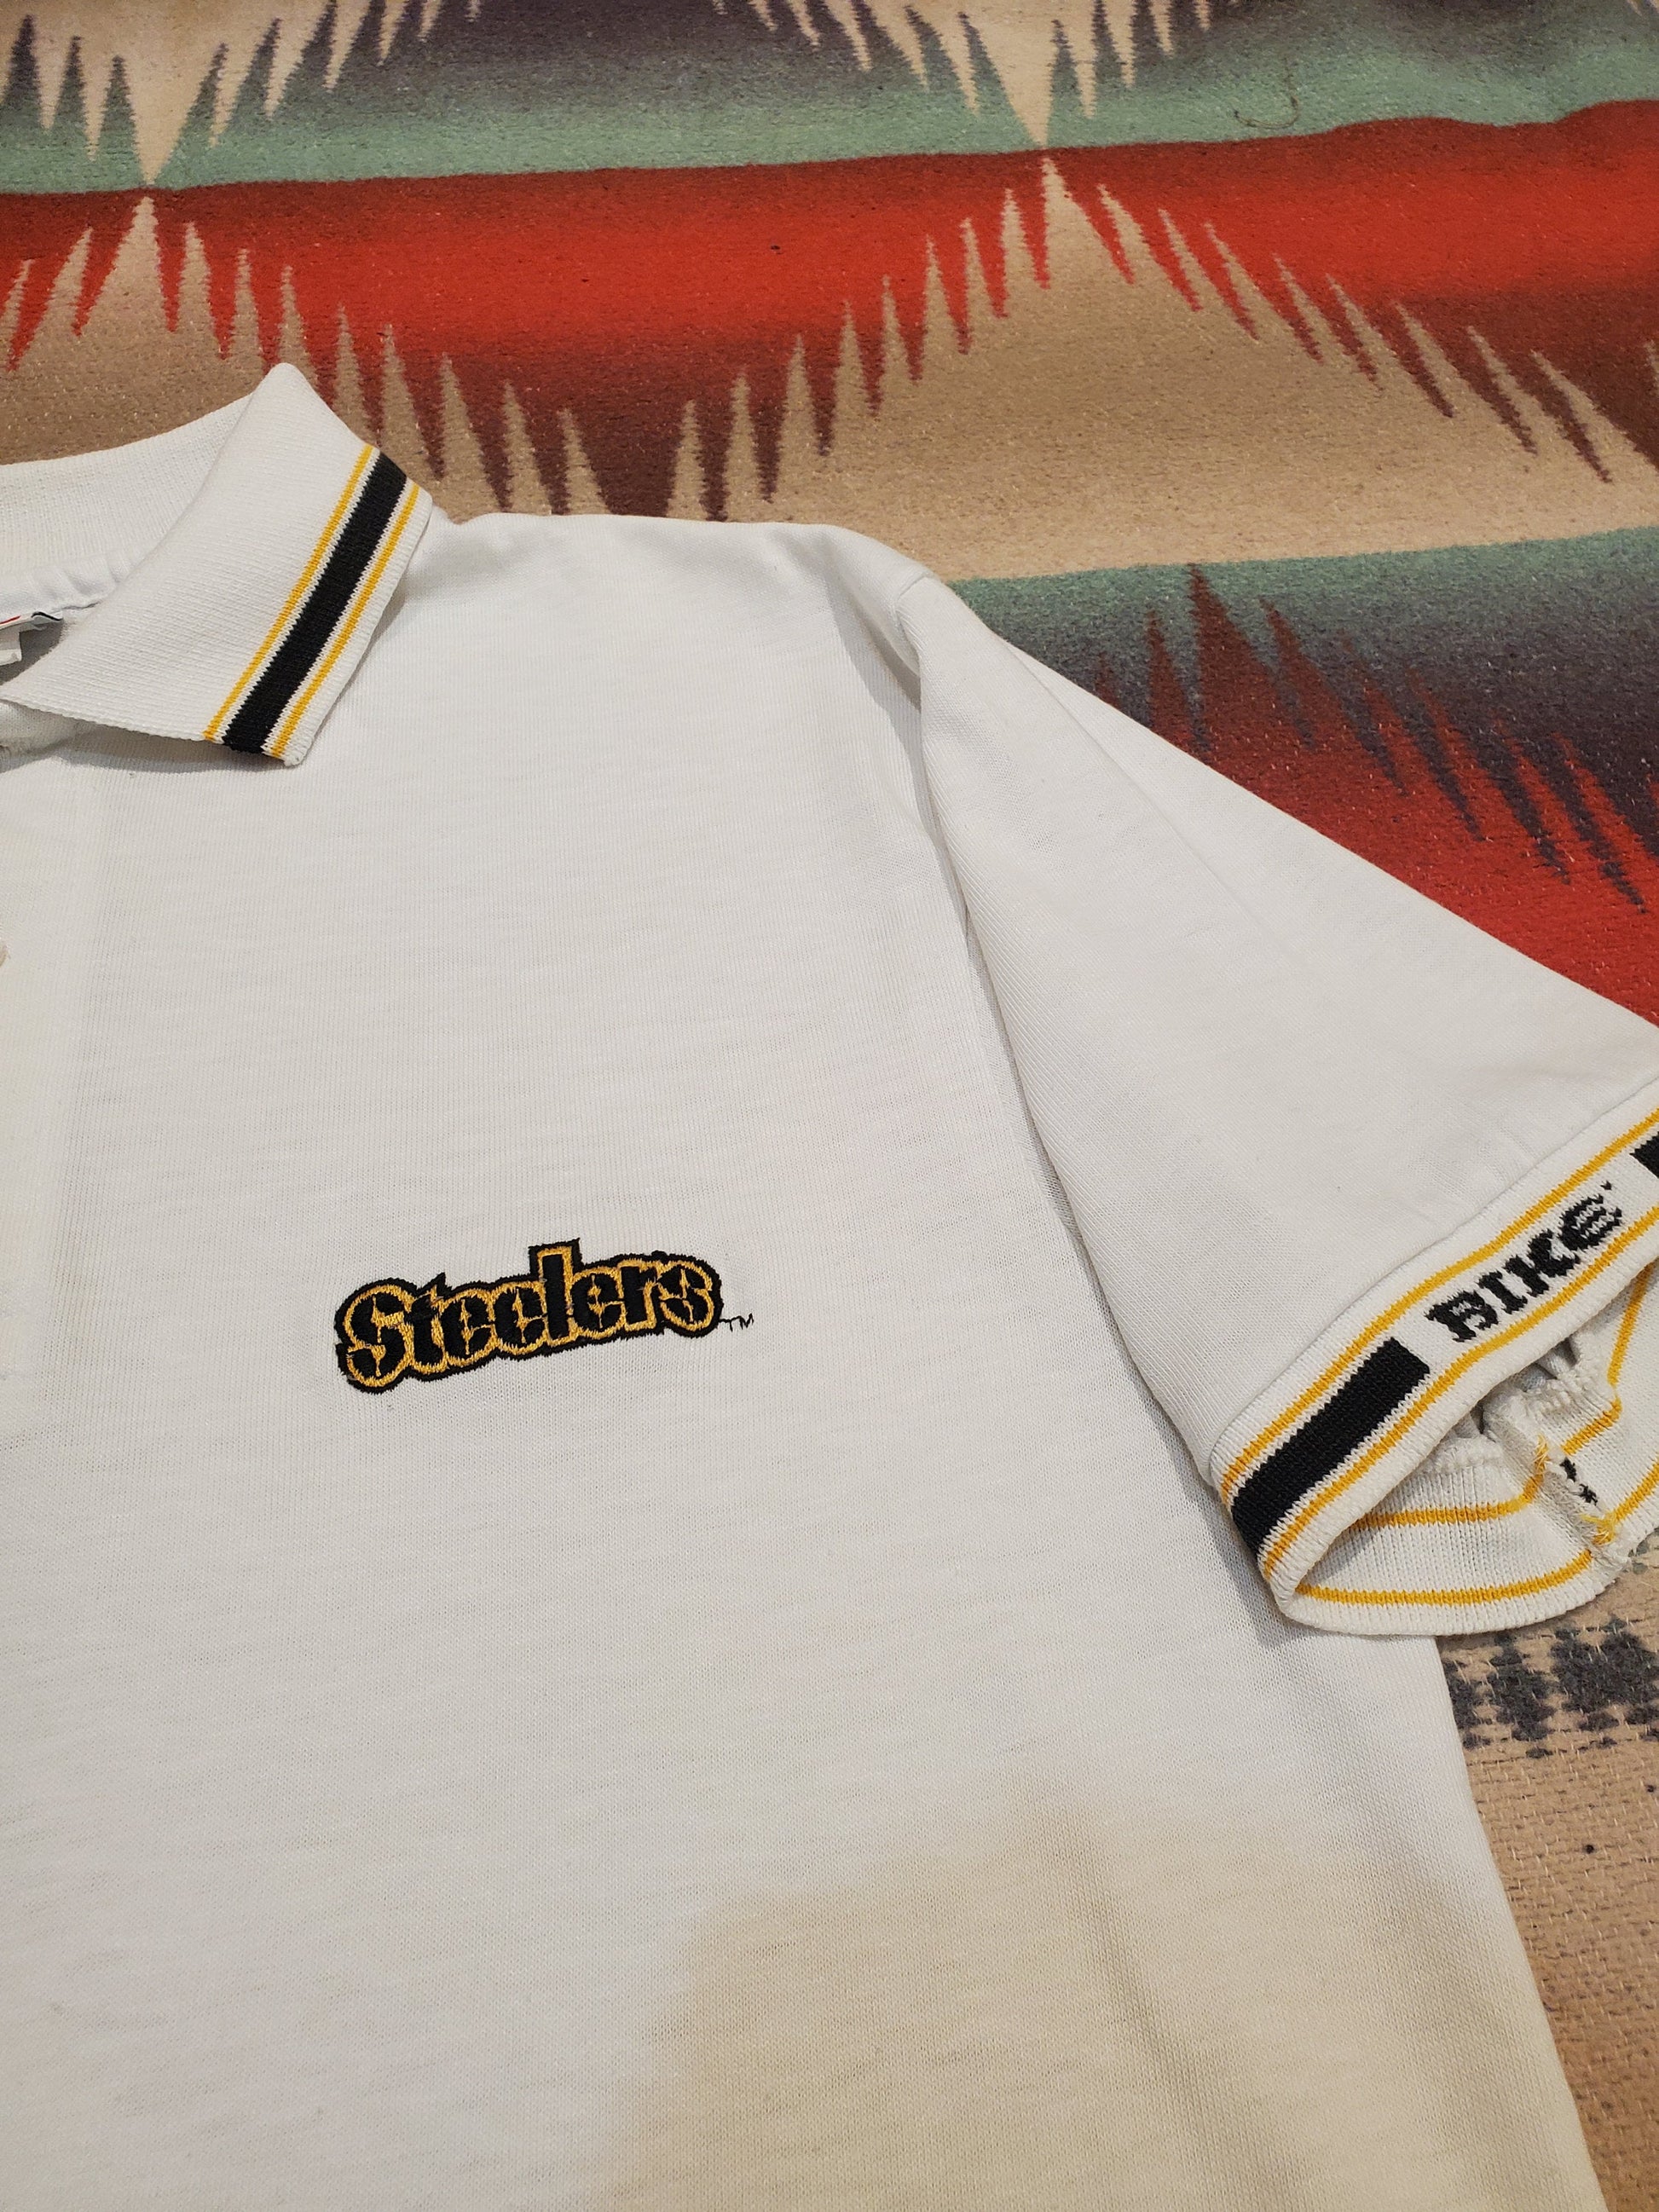 1990s Bike Embroidered Steelers Polo Shirt Made in USA size M